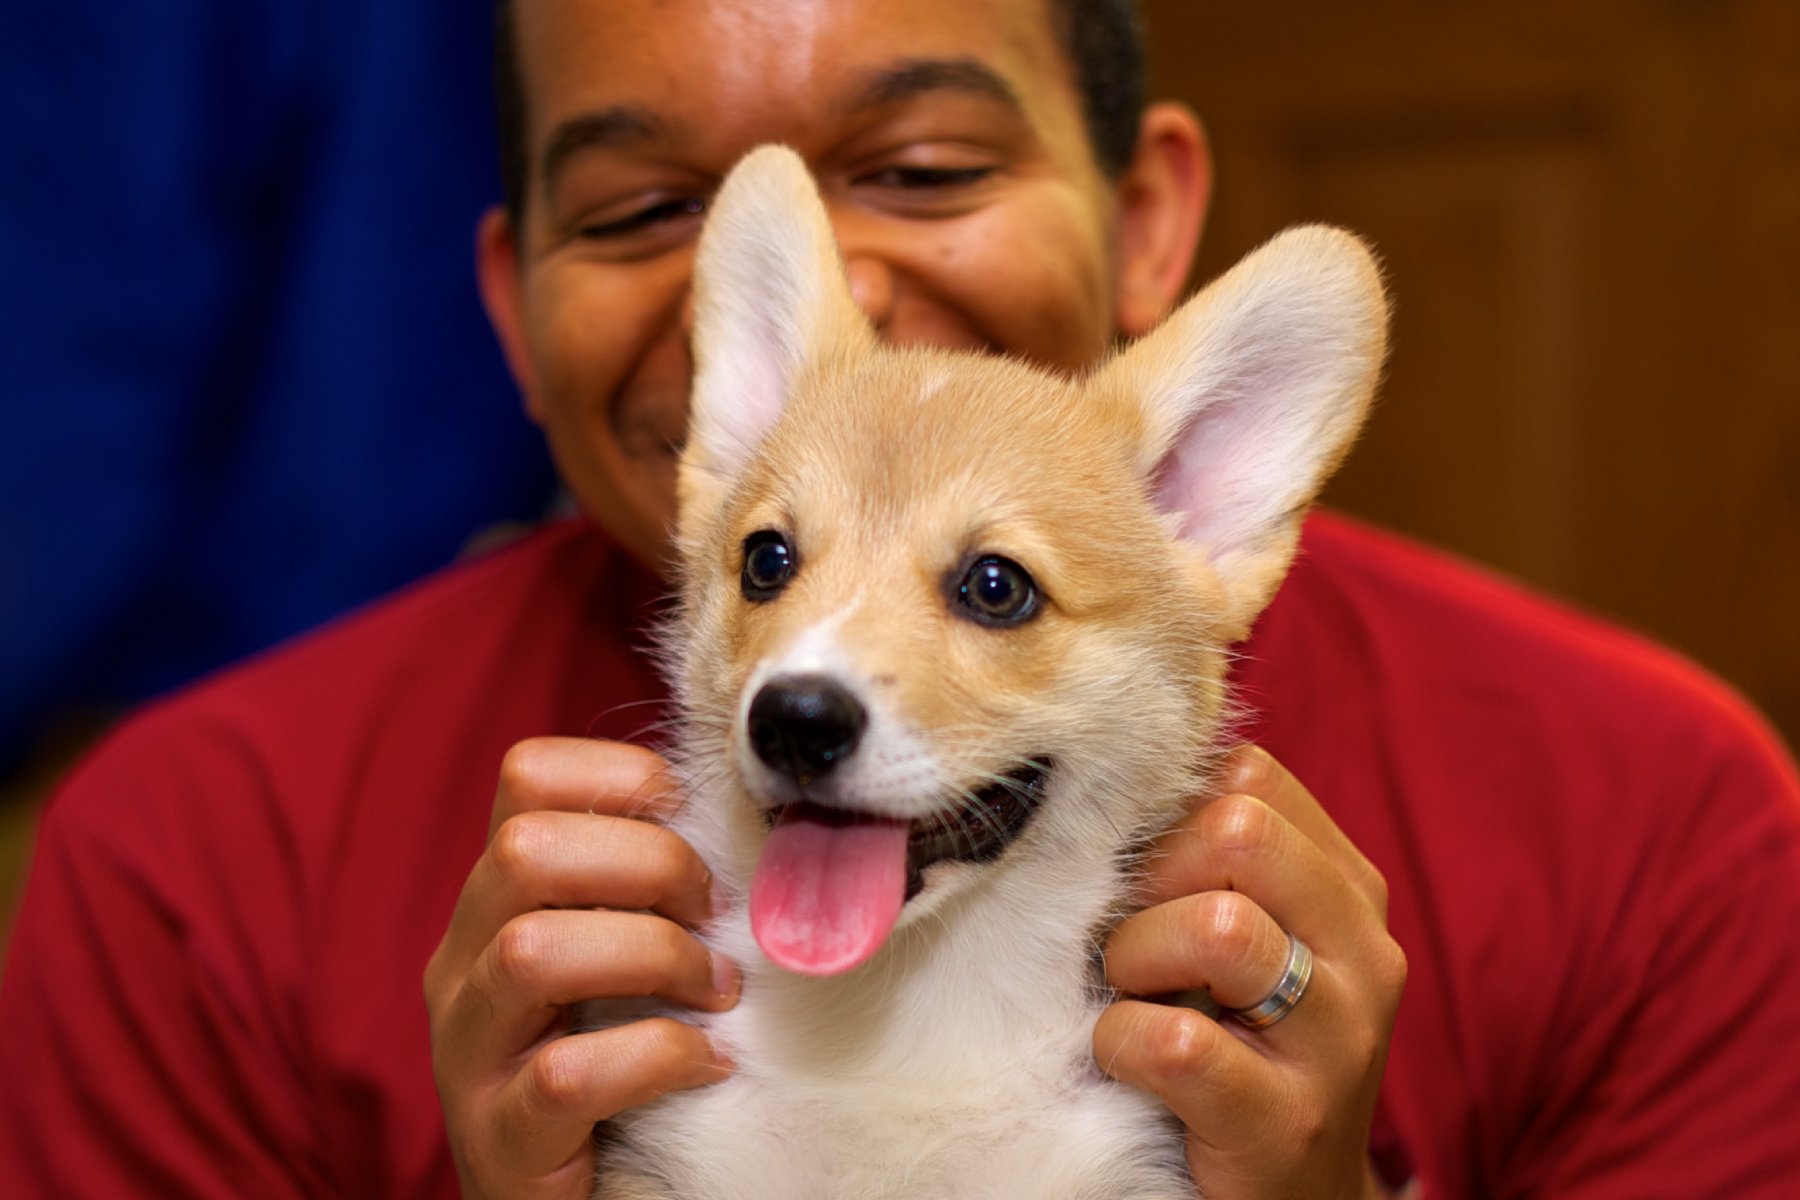 A man in a red shirt holds a baby corgi on his knees.